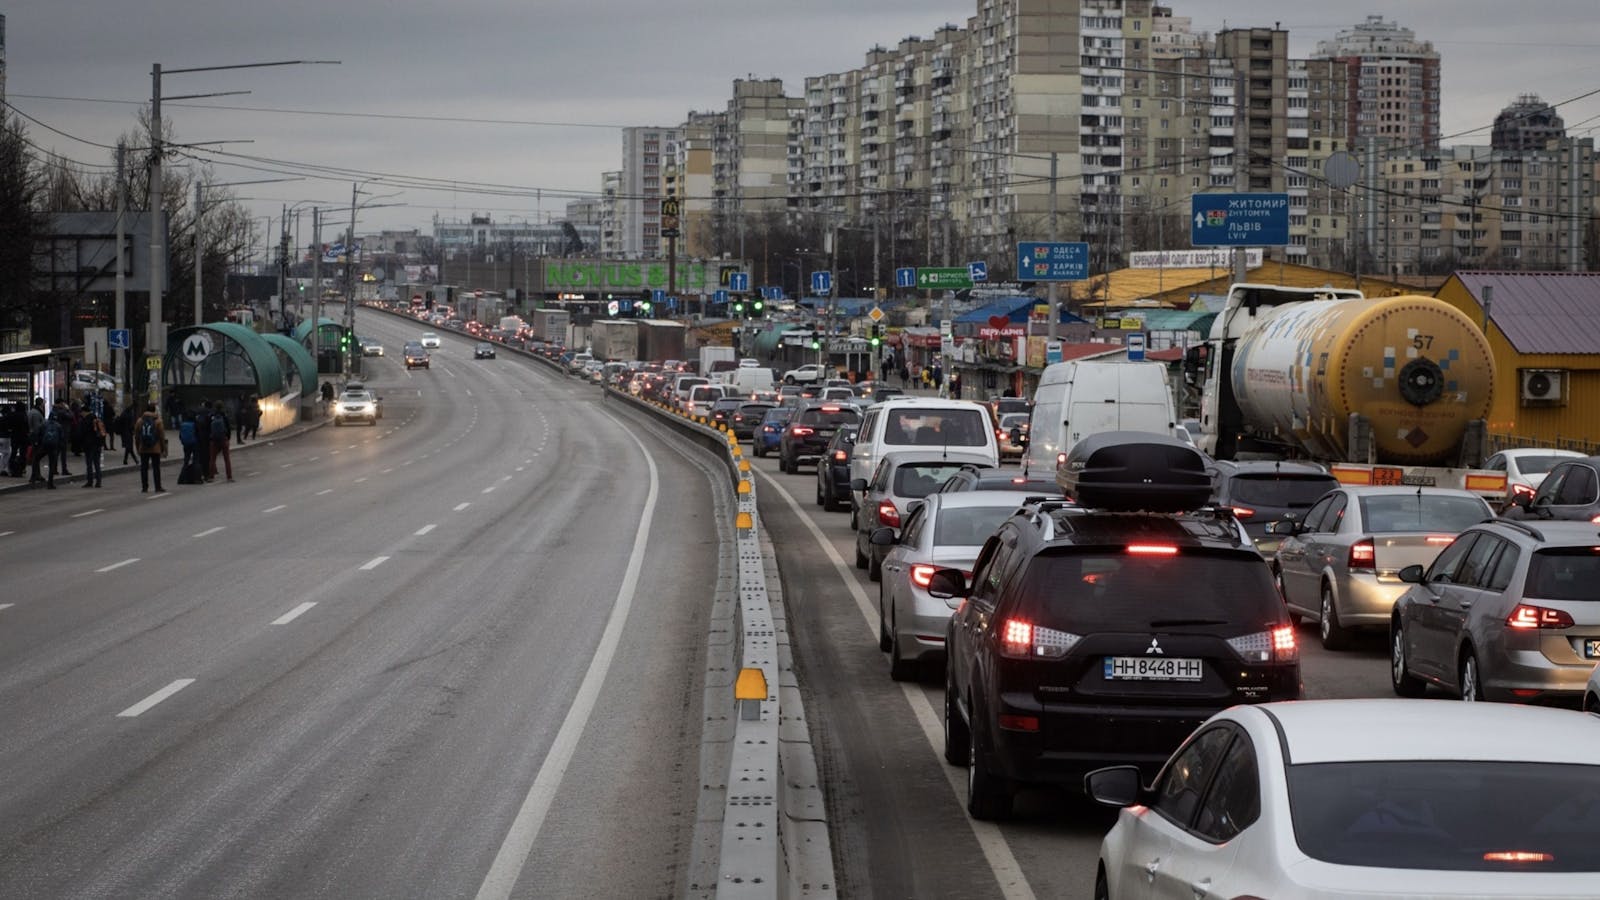 A traffic jam as people try to leave Kyiv, Ukraine today after Russia's attack. Photo by Bloomberg.